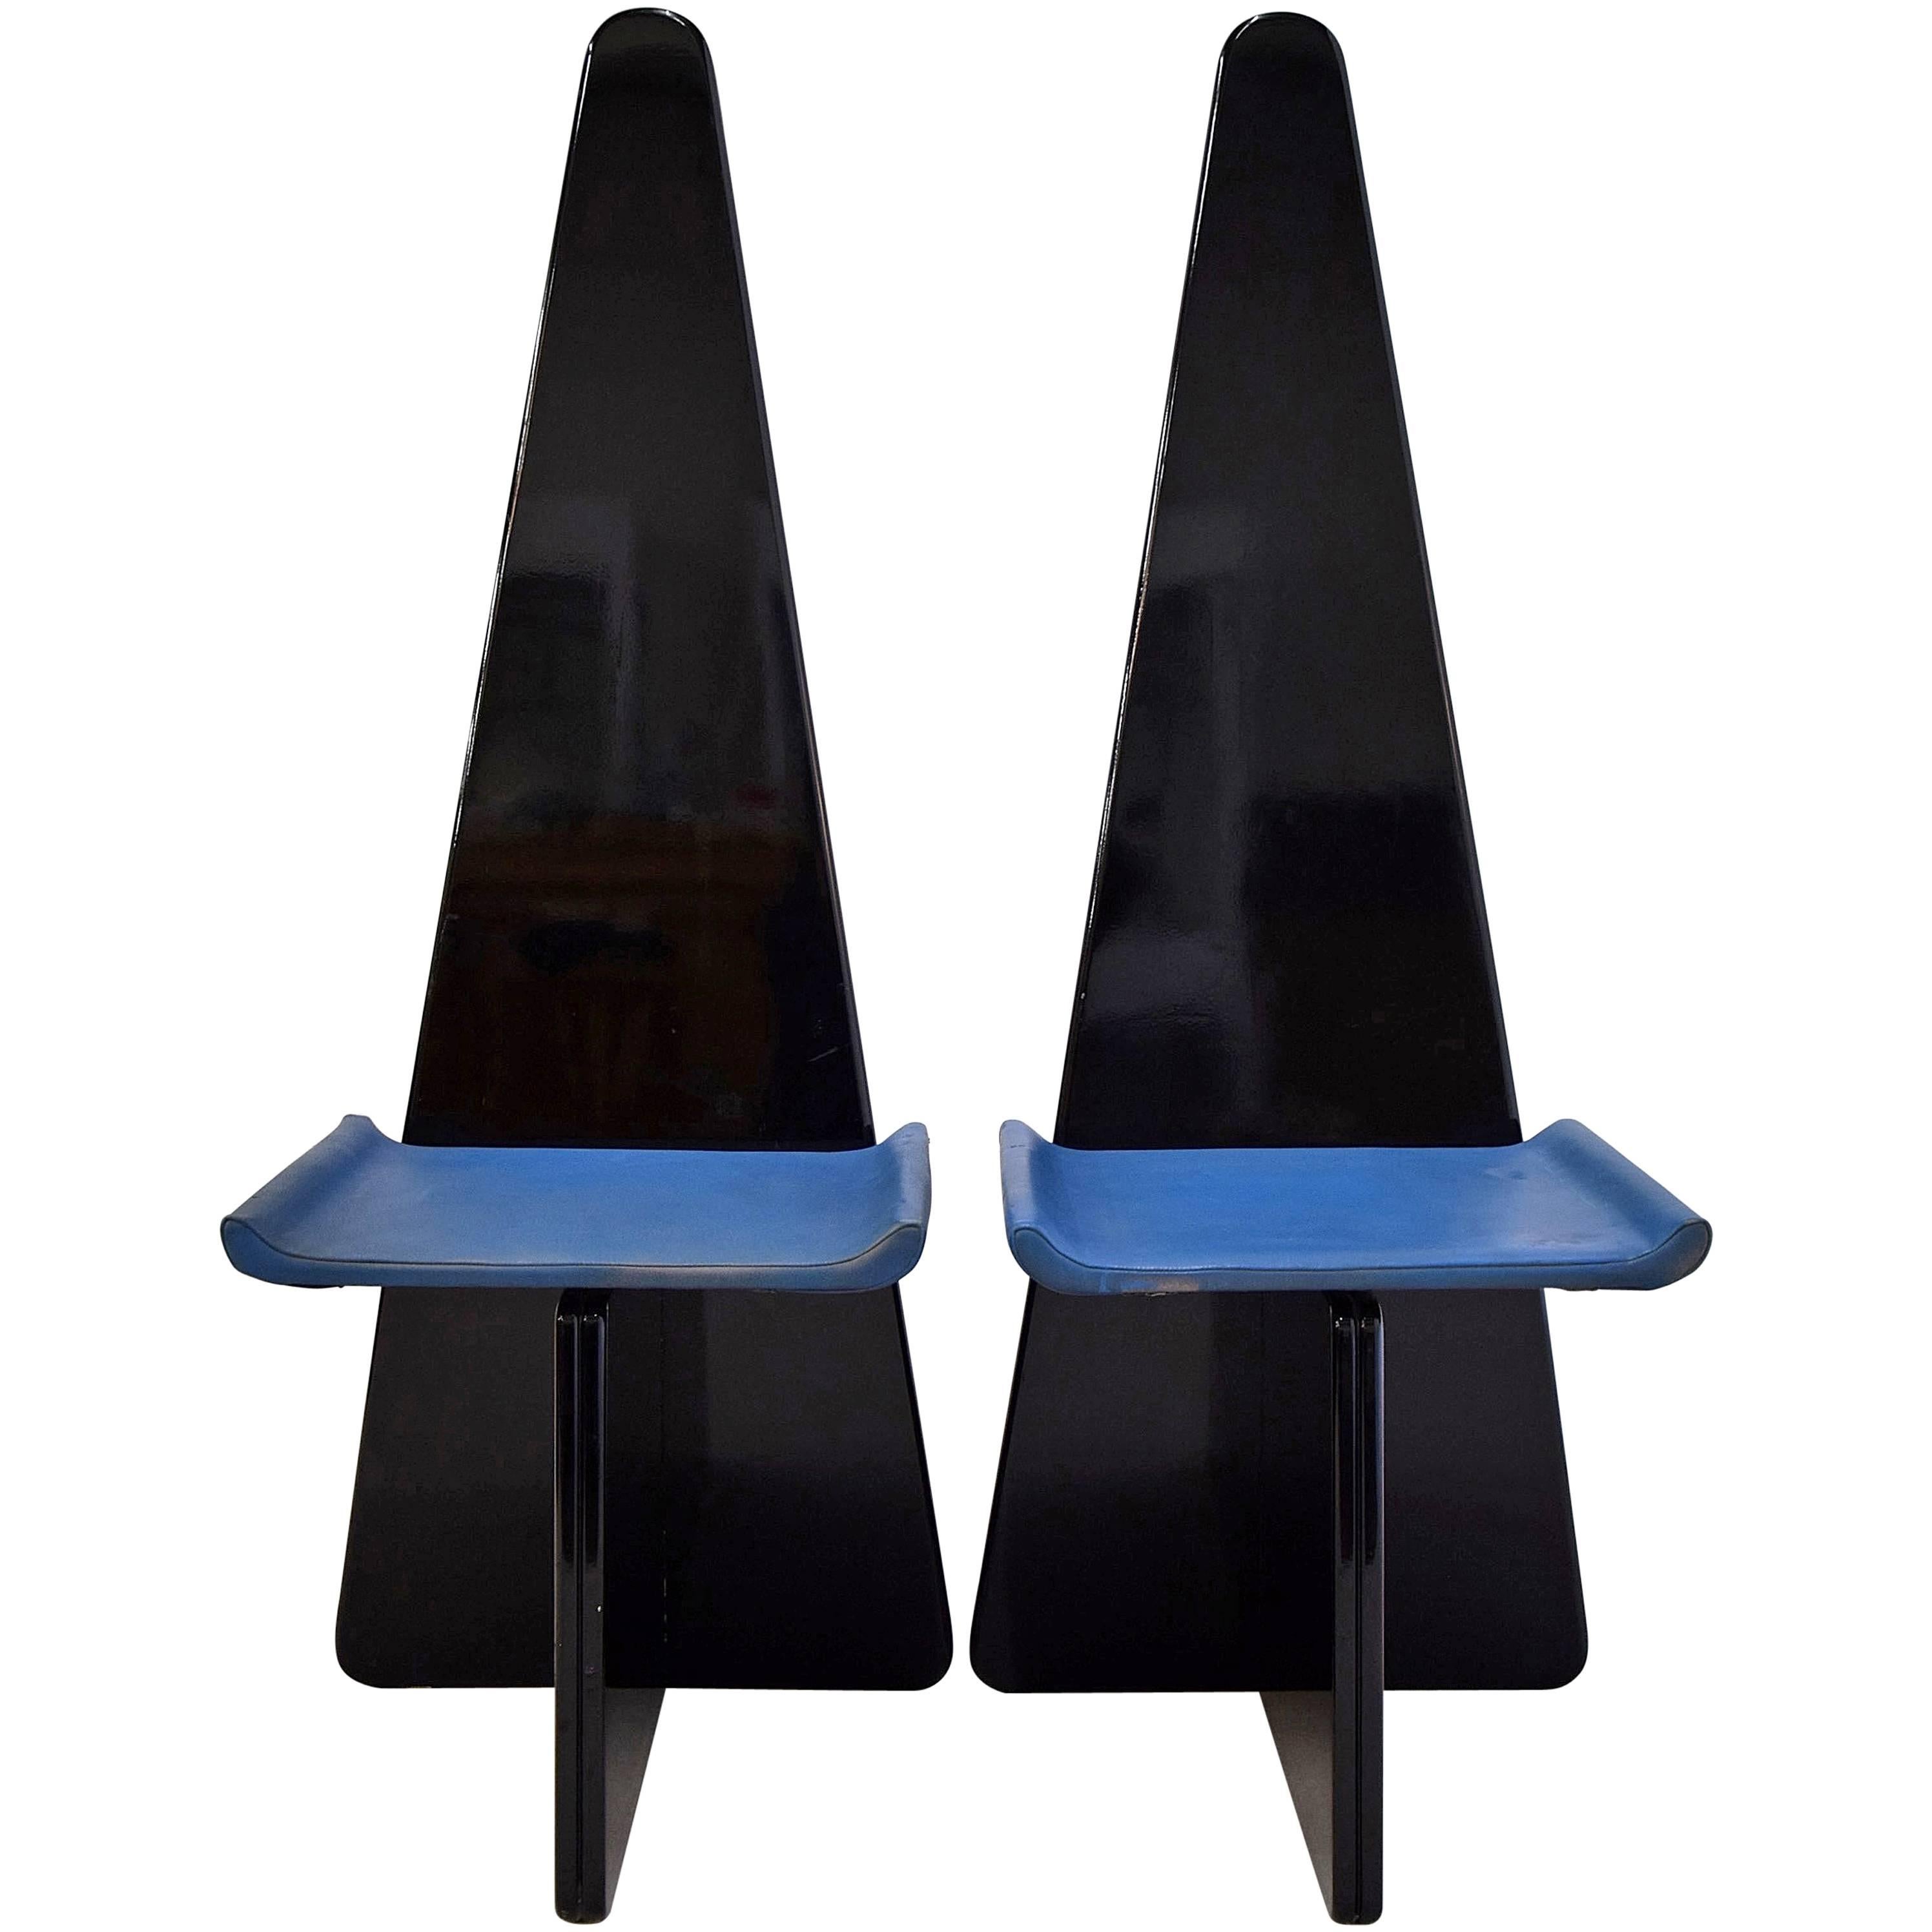 Two 1970s Sculpture Chairs by Antonio Ronchetti for Sormani